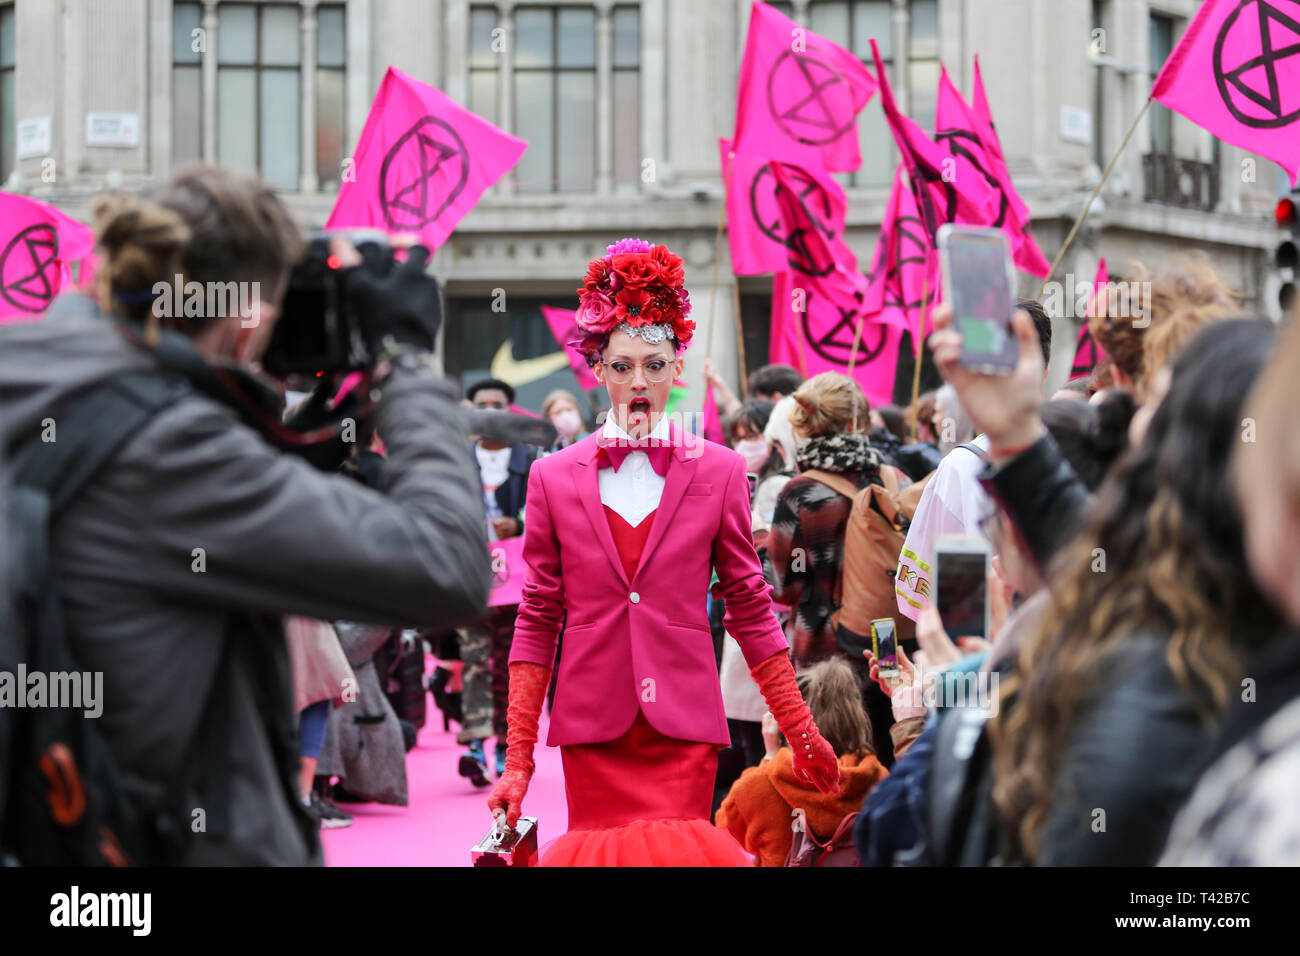 Oxford Circus, London. 12th April, 2019. Environmental campaign group Extinction Rebellion hold a fashion show on the infamous junction to highlight issues of un-sustainability in fashion and how its practices impact on the environment. Credit: Penelope Barritt/Alamy Live News Stock Photo